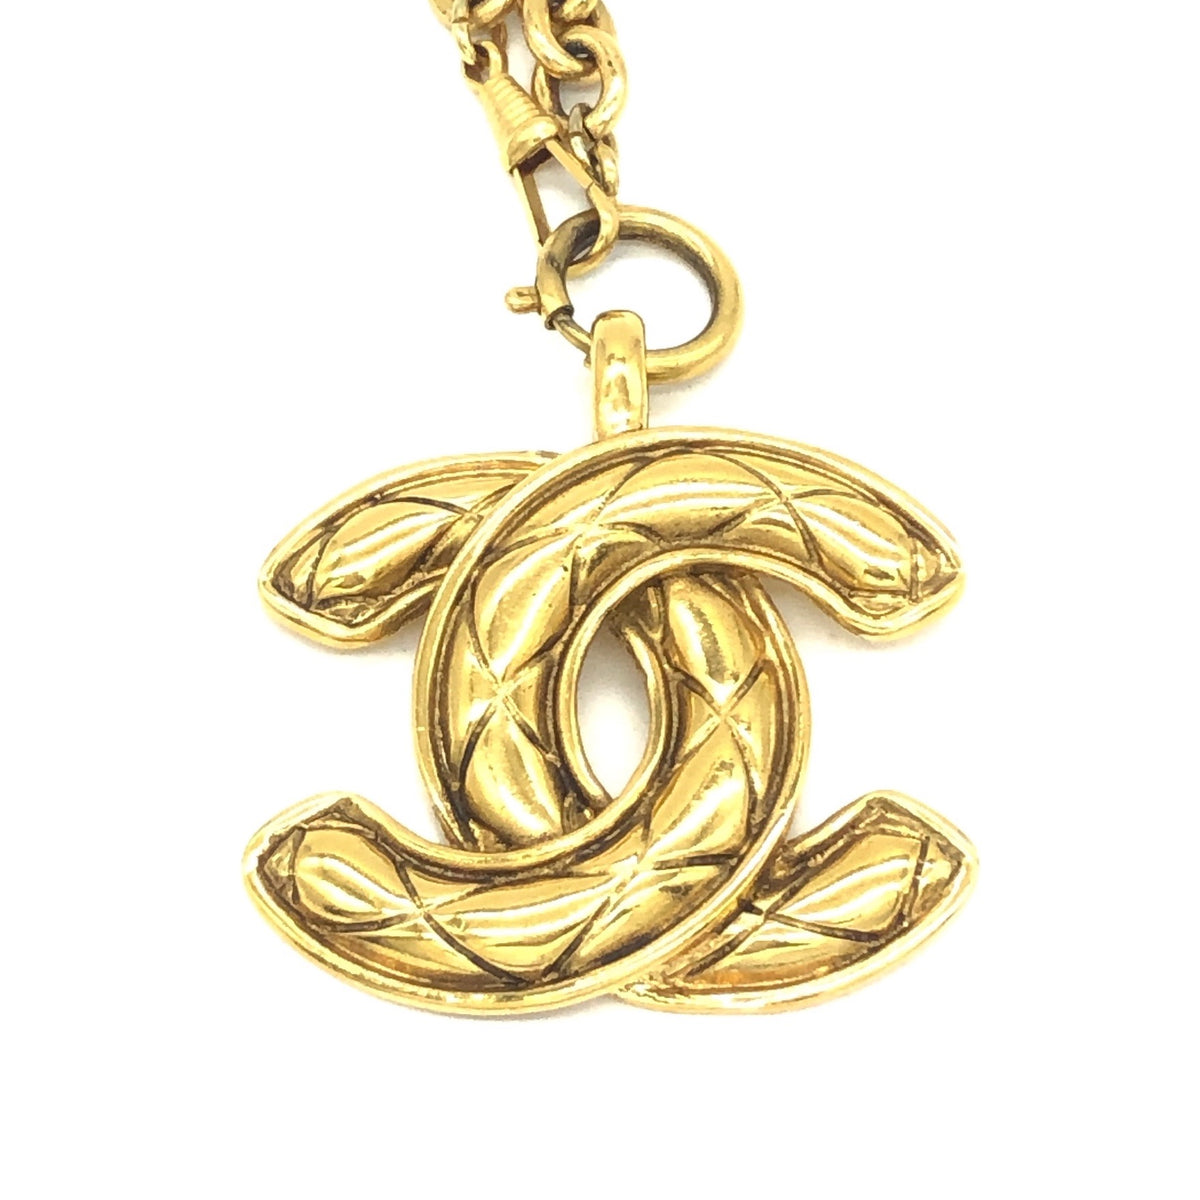 CHANEL Gold Plated CC Logos Round Vintage Necklace Pendant Choker RARE